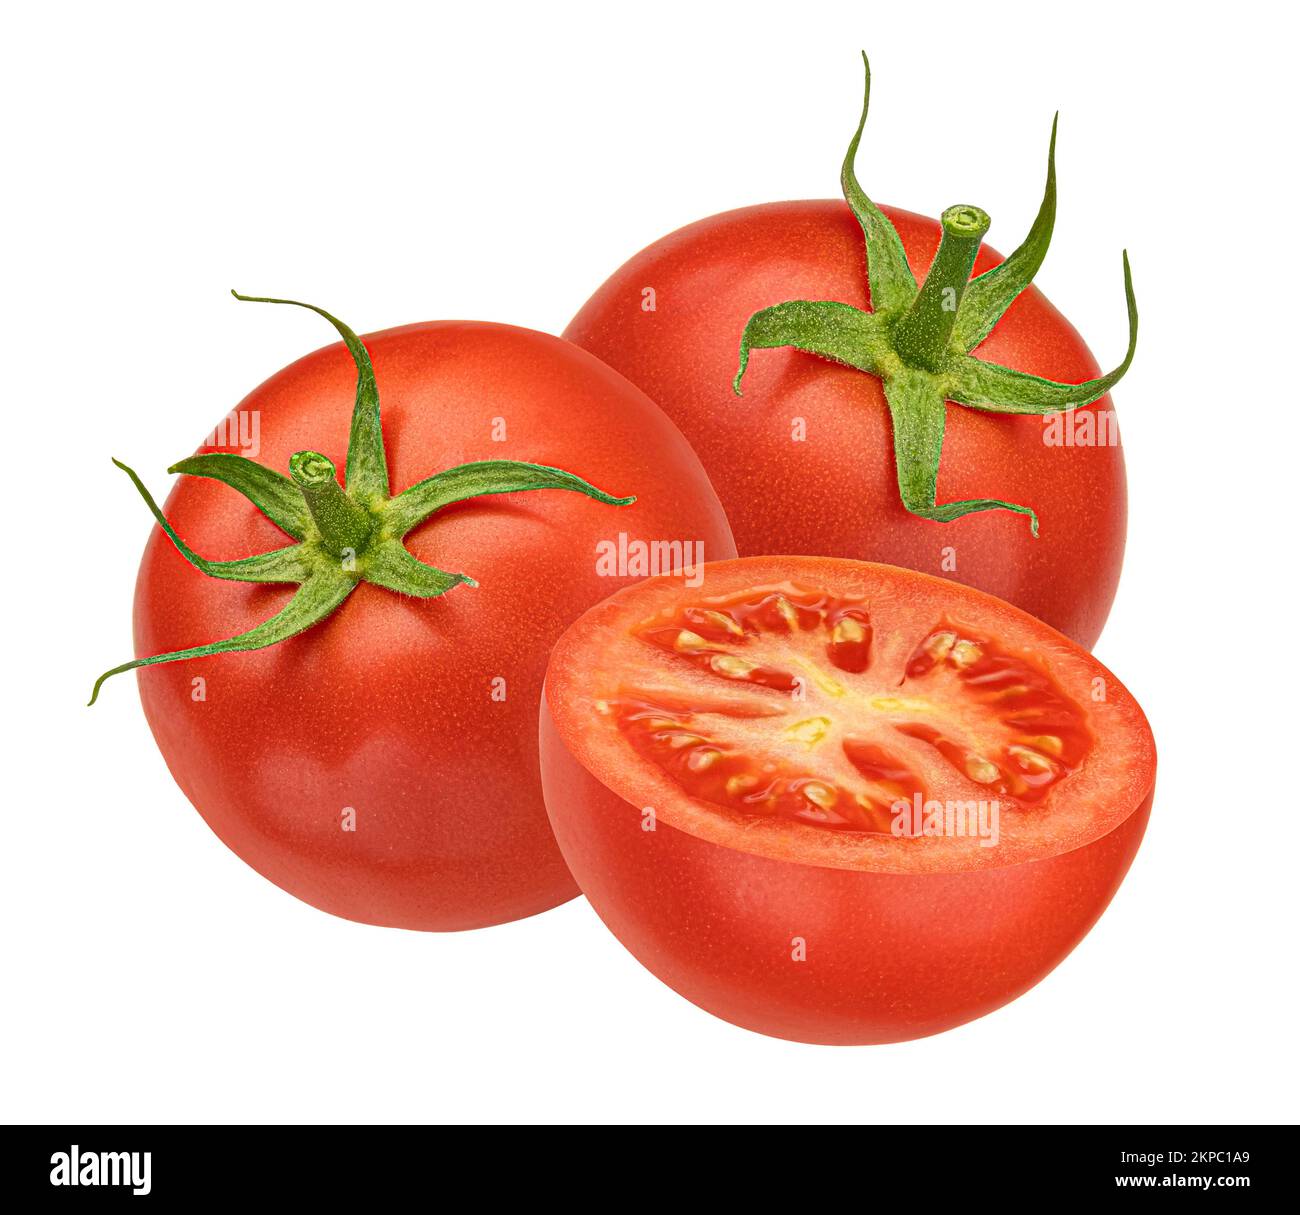 Cherry tomatoes isolated on white background, full depth of field Stock Photo